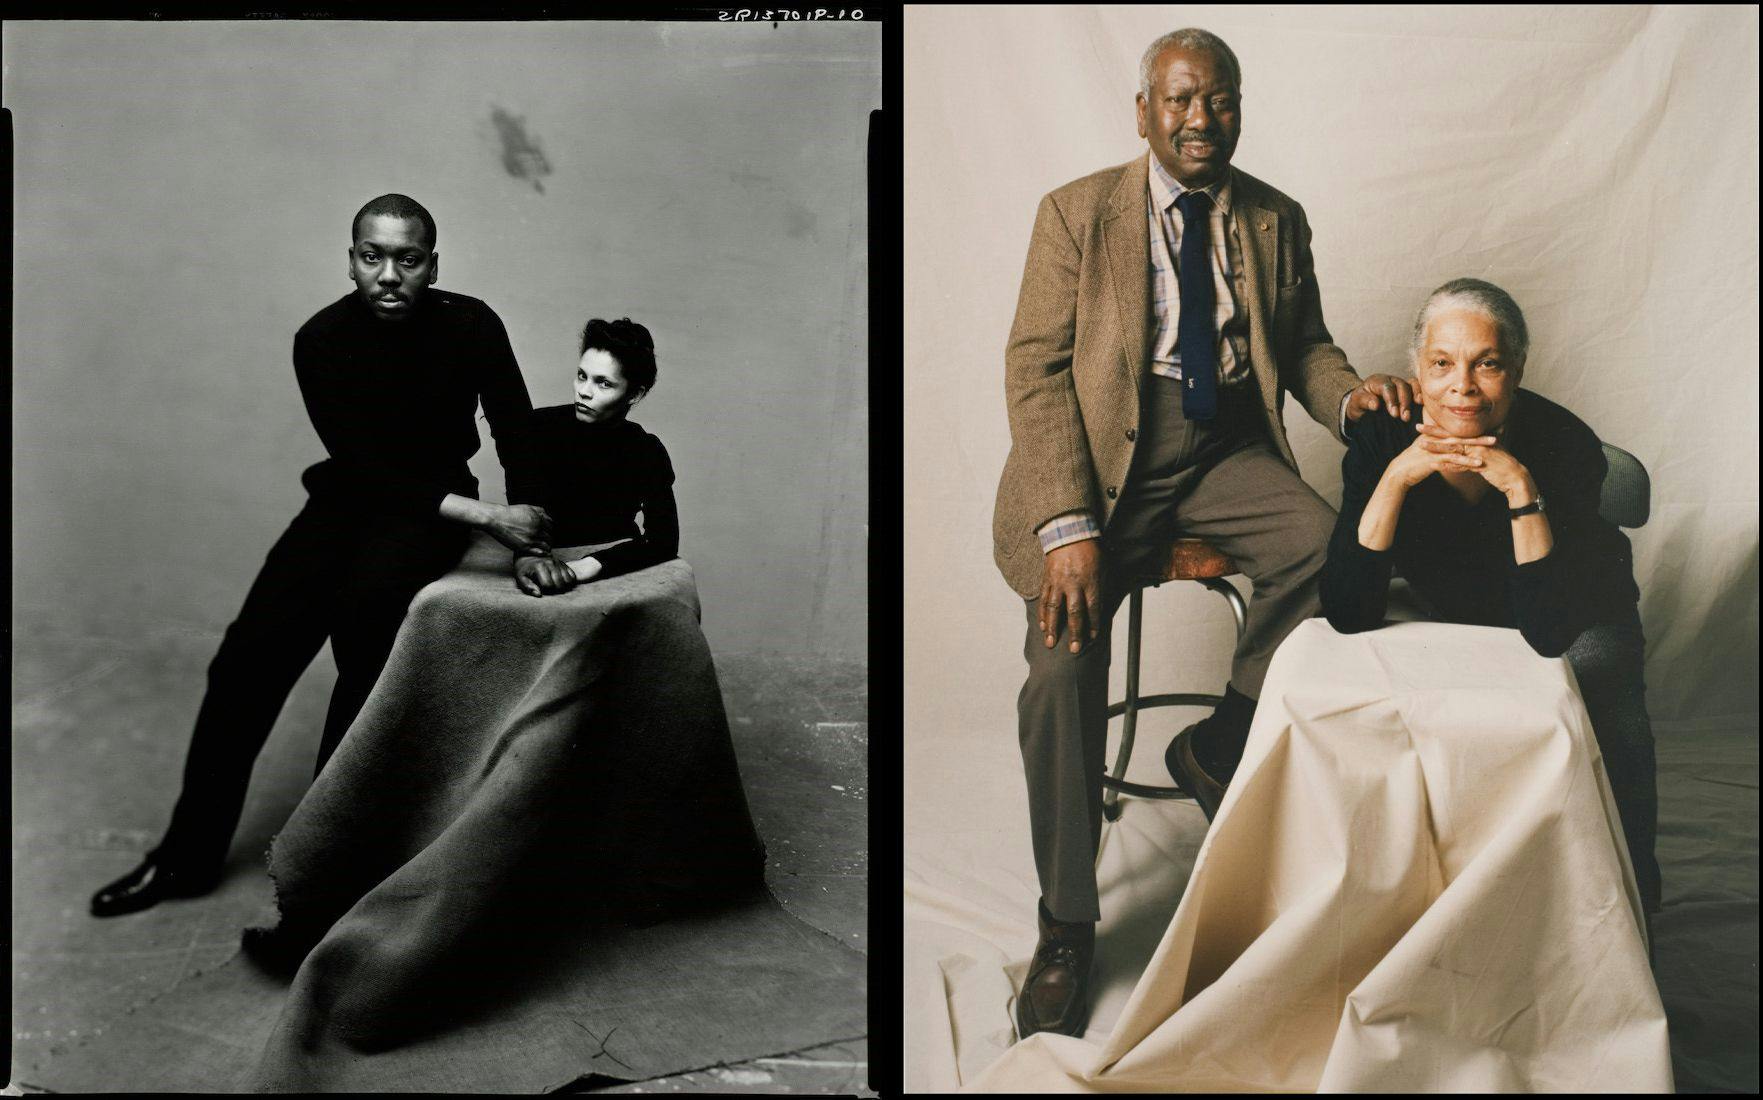 Two side-by-side studio portraits of Jacob Lawrence and Gwendolyn Knight Lawrence